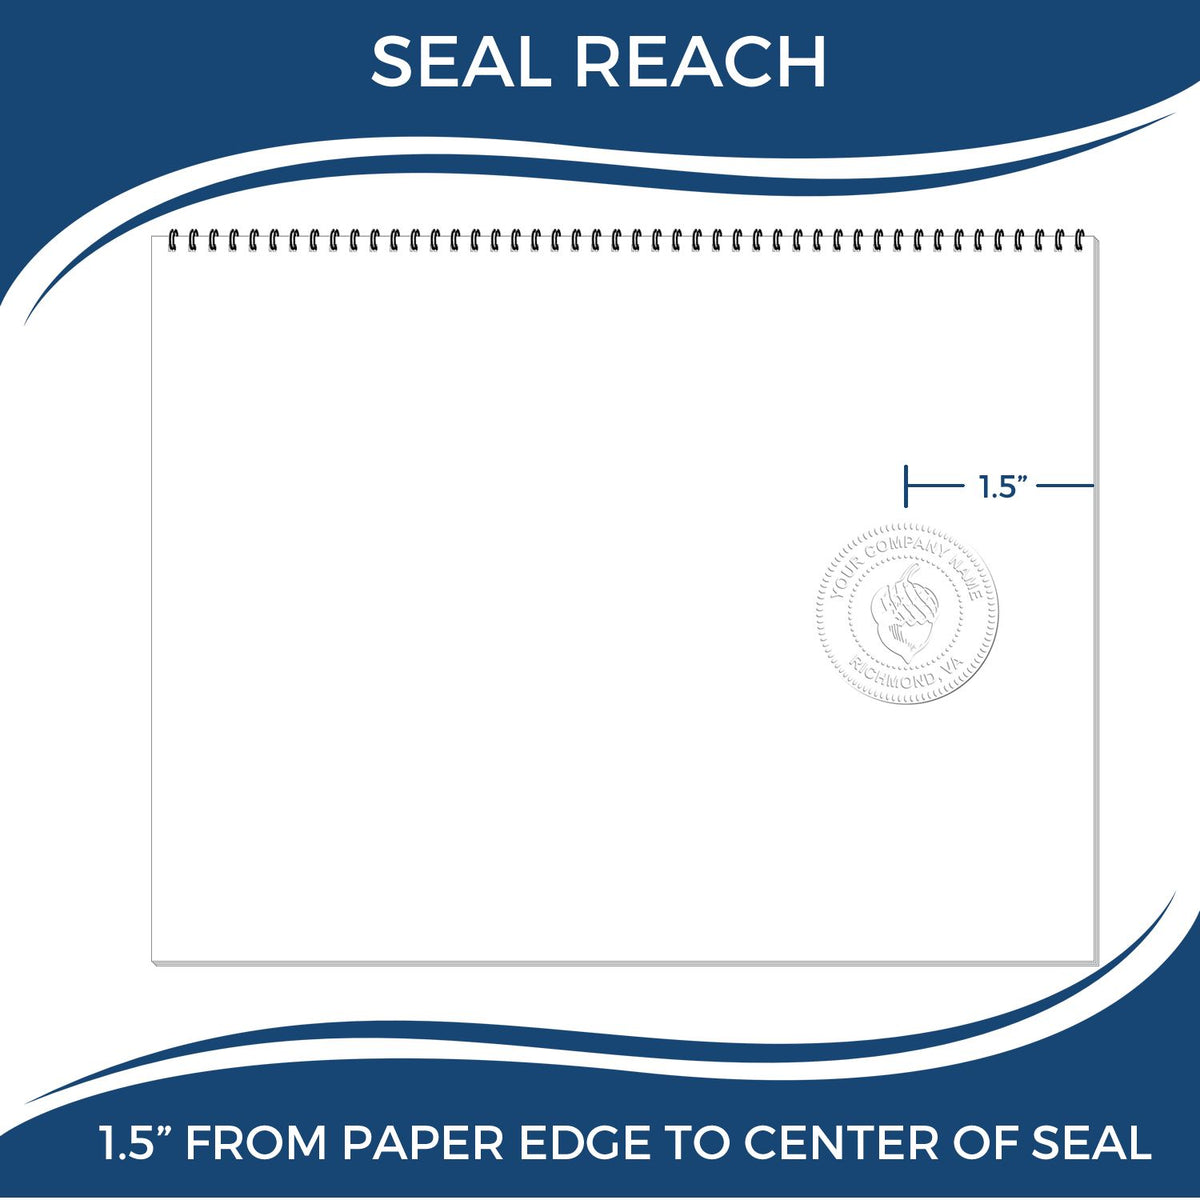 An infographic showing the seal reach which is represented by a ruler and a miniature seal image of the Hybrid South Carolina Land Surveyor Seal